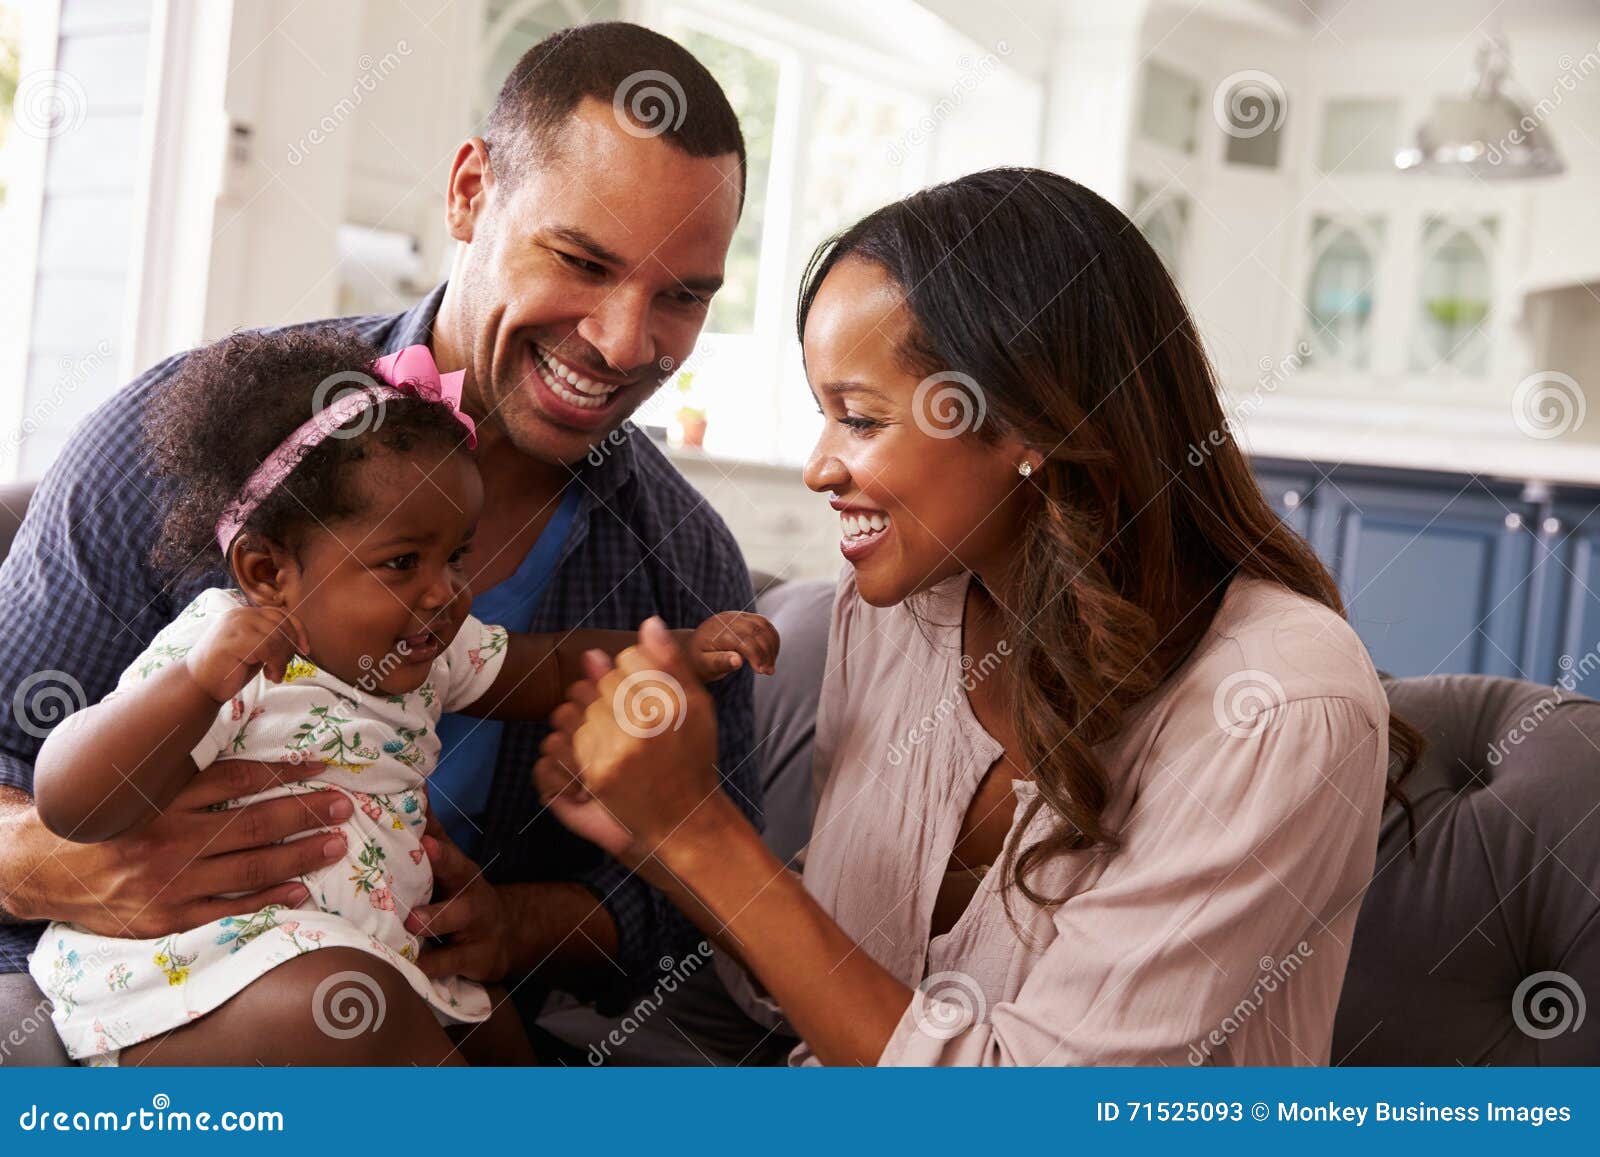 happy parents playing with baby girl on dadÃ¯Â¿Â½s knee, close-up